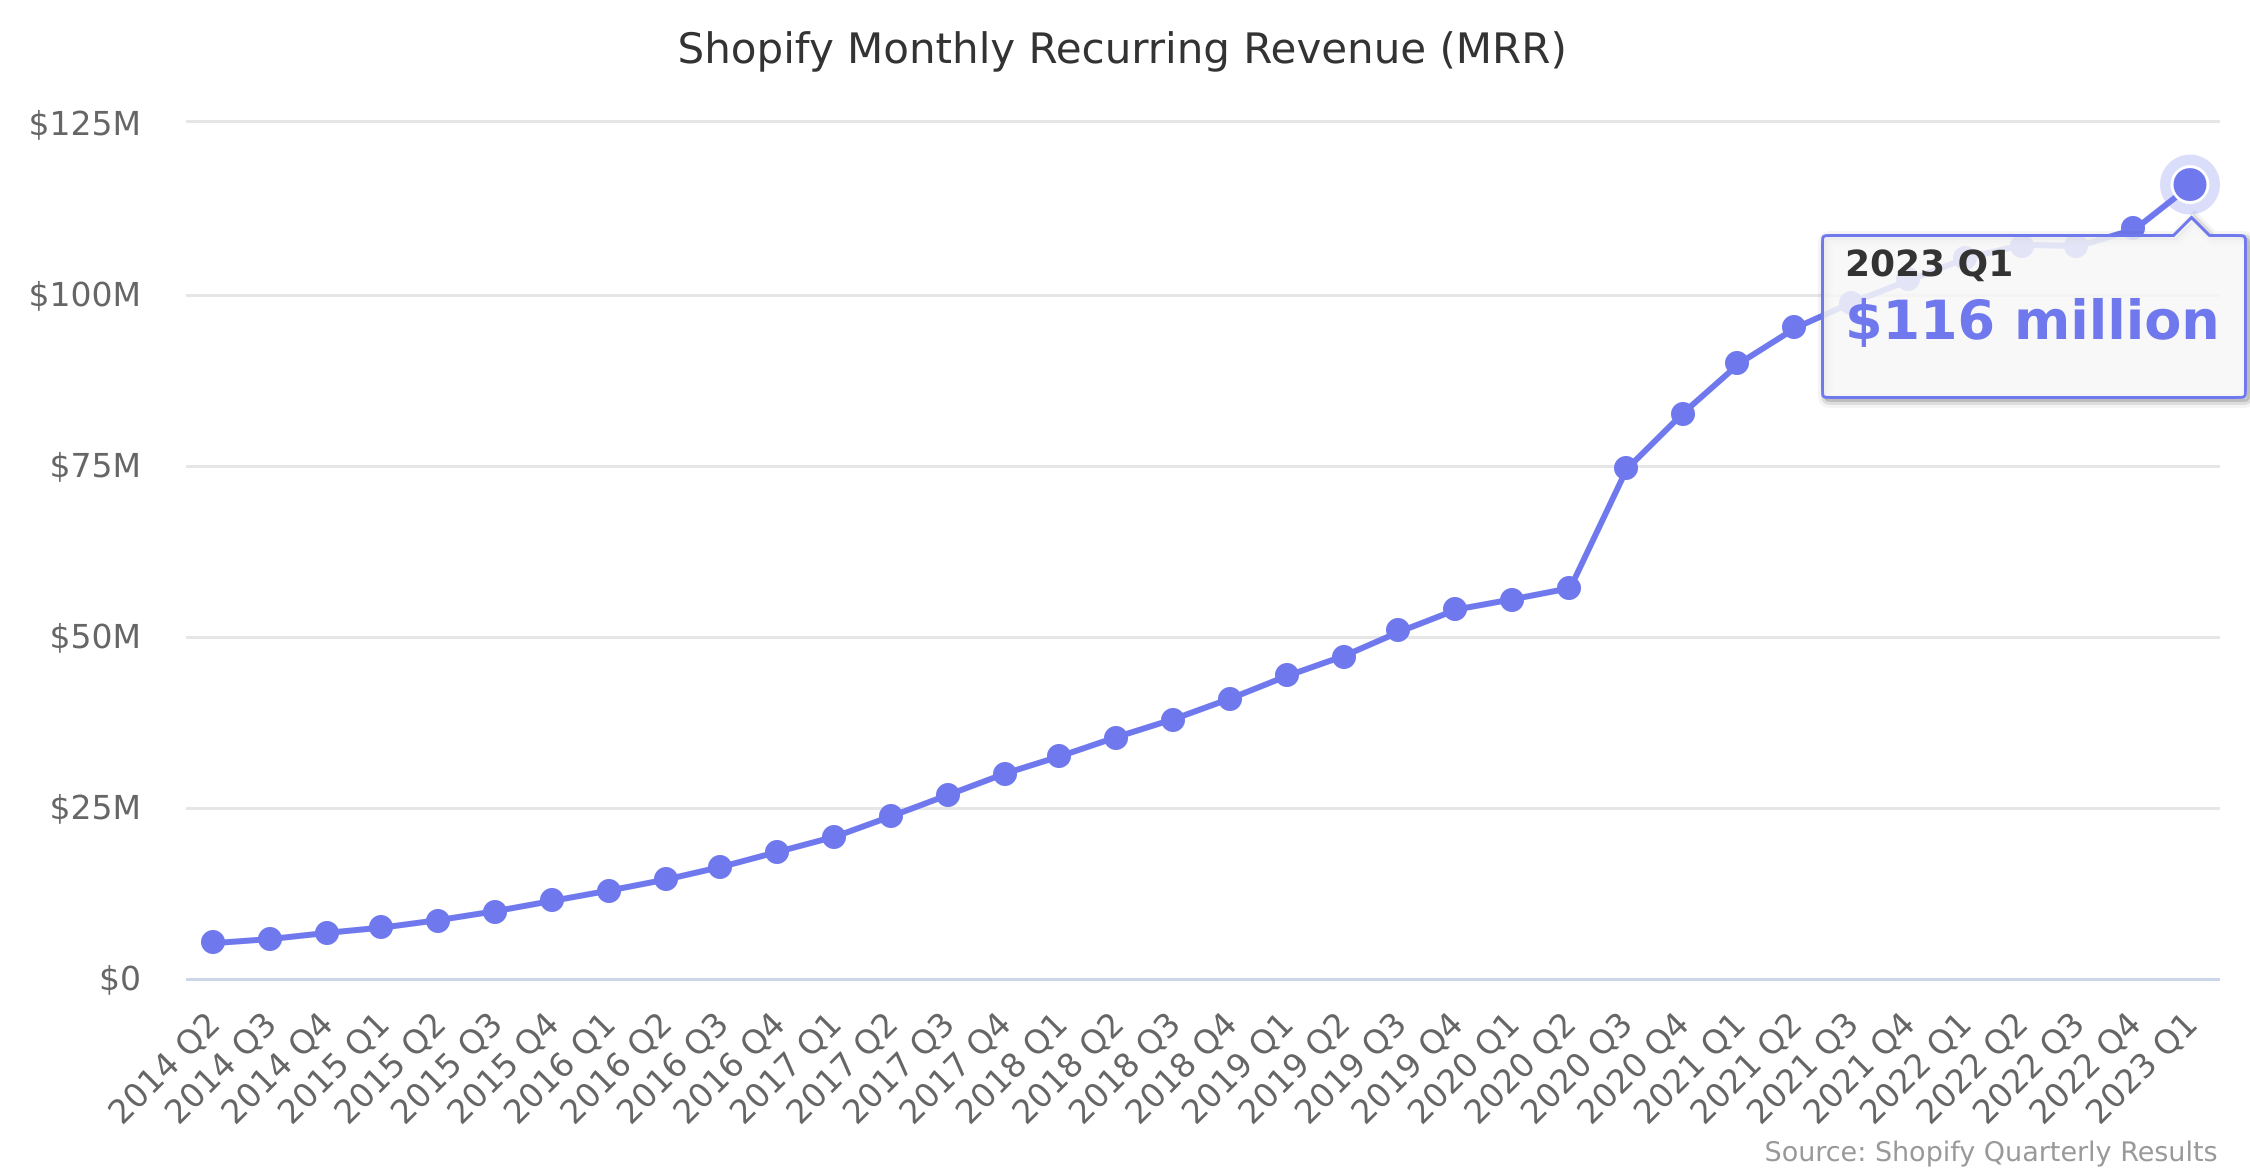 Shopify Monthly Recurring Revenue (MRR)